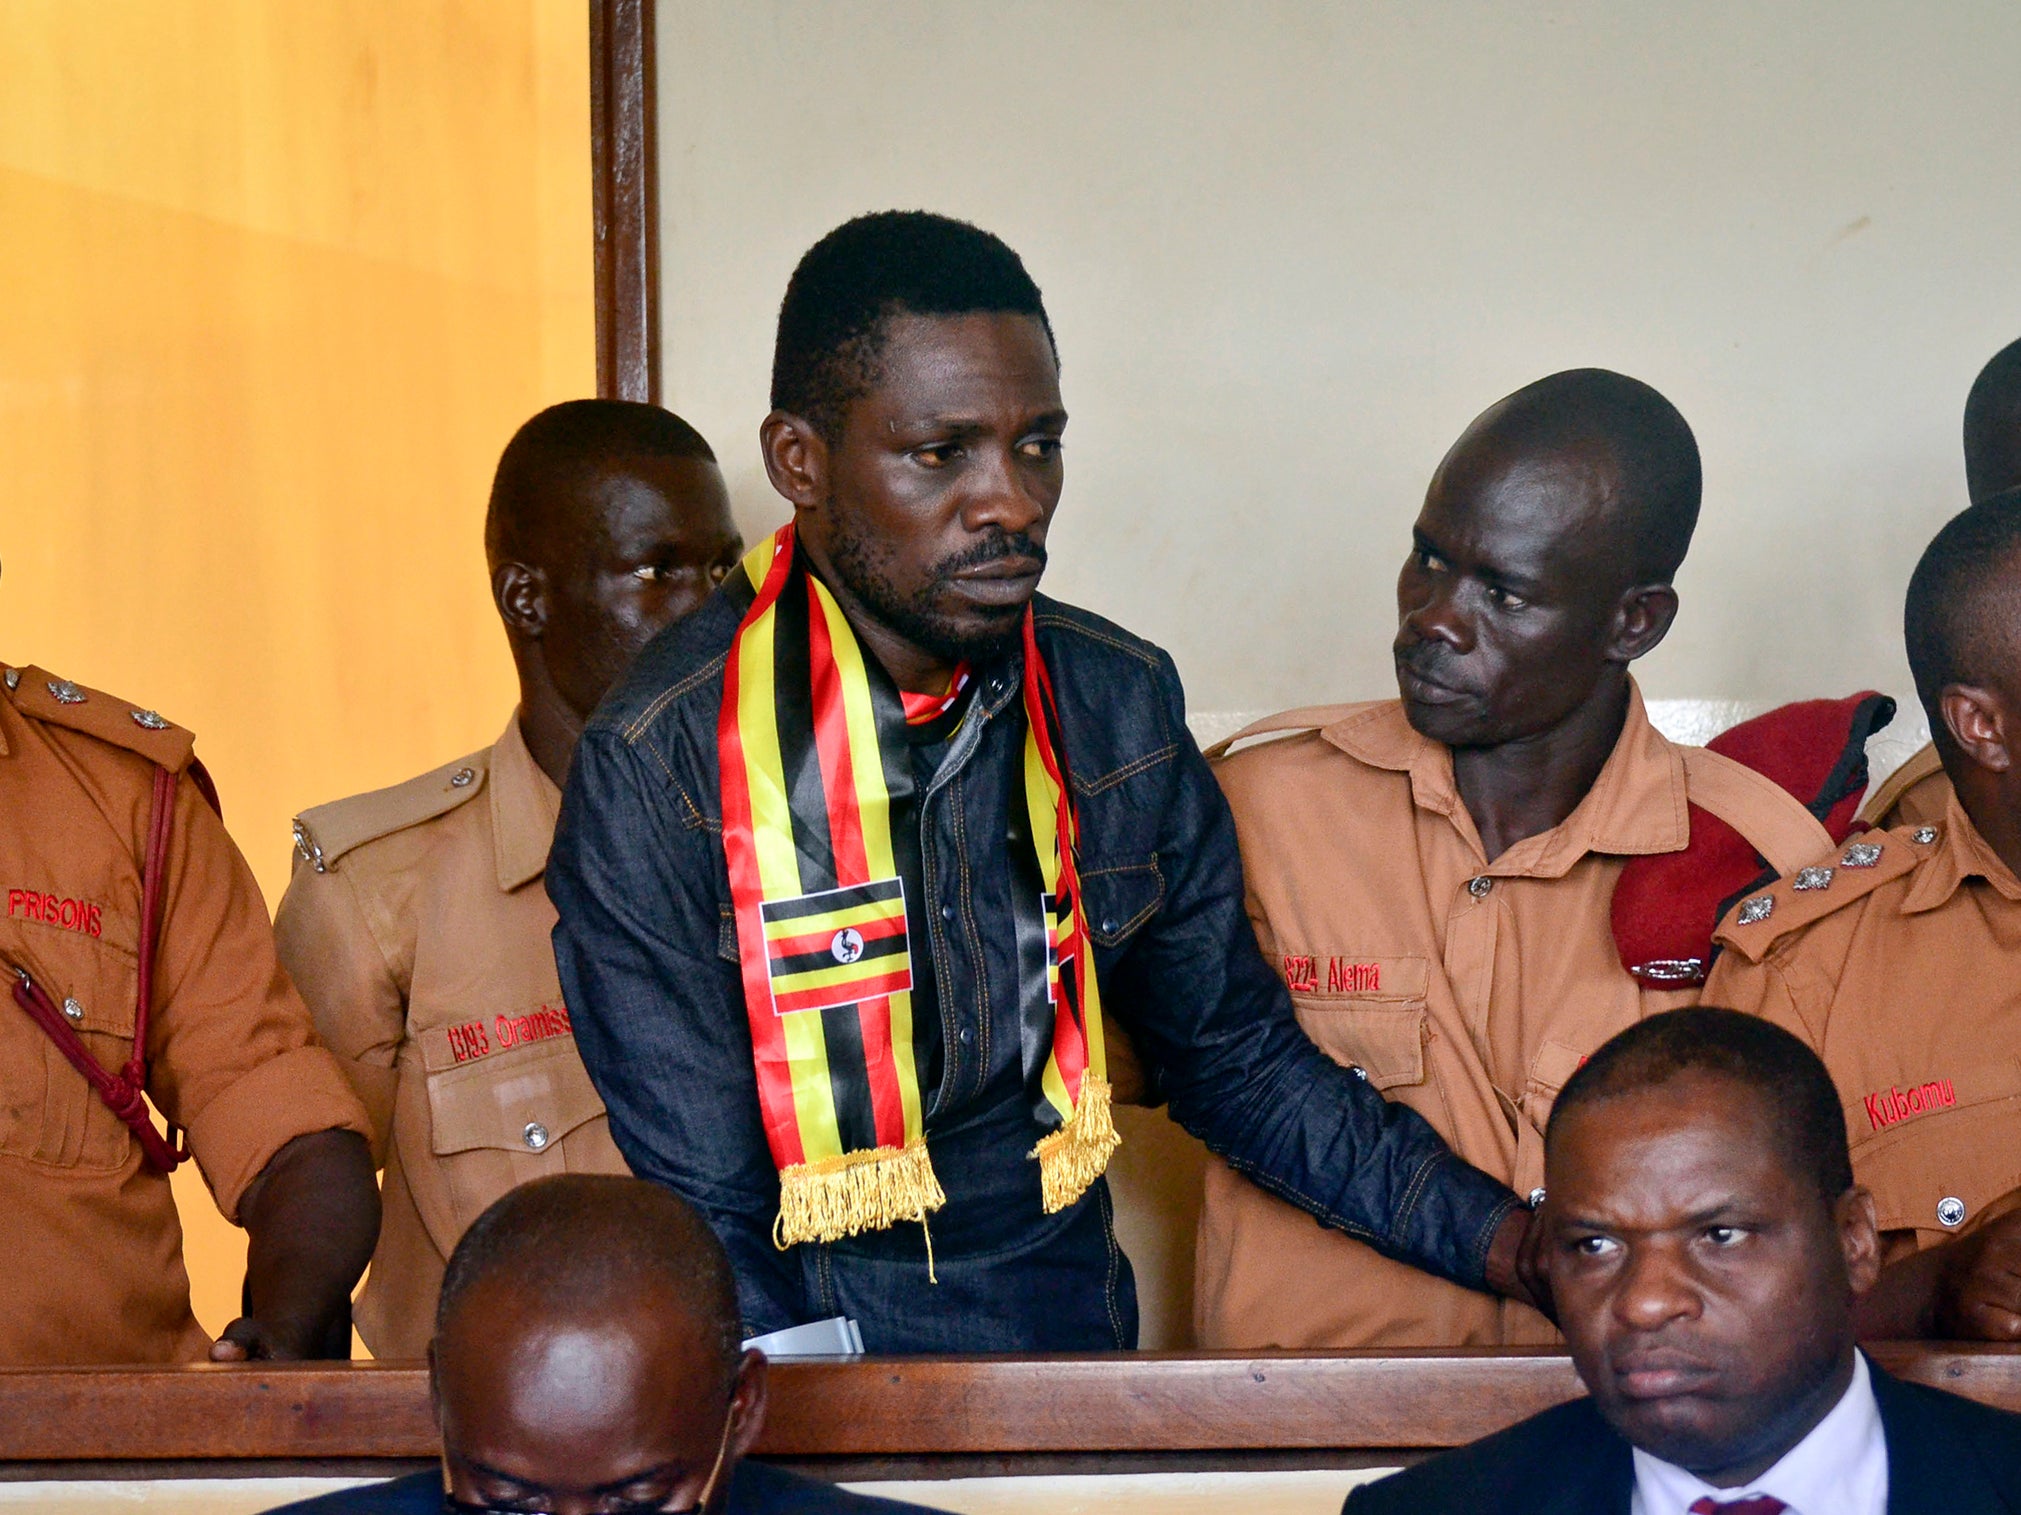 Robert Ssentamu limped during his appearance in military court and appeared to cry as he rubbed his eyes